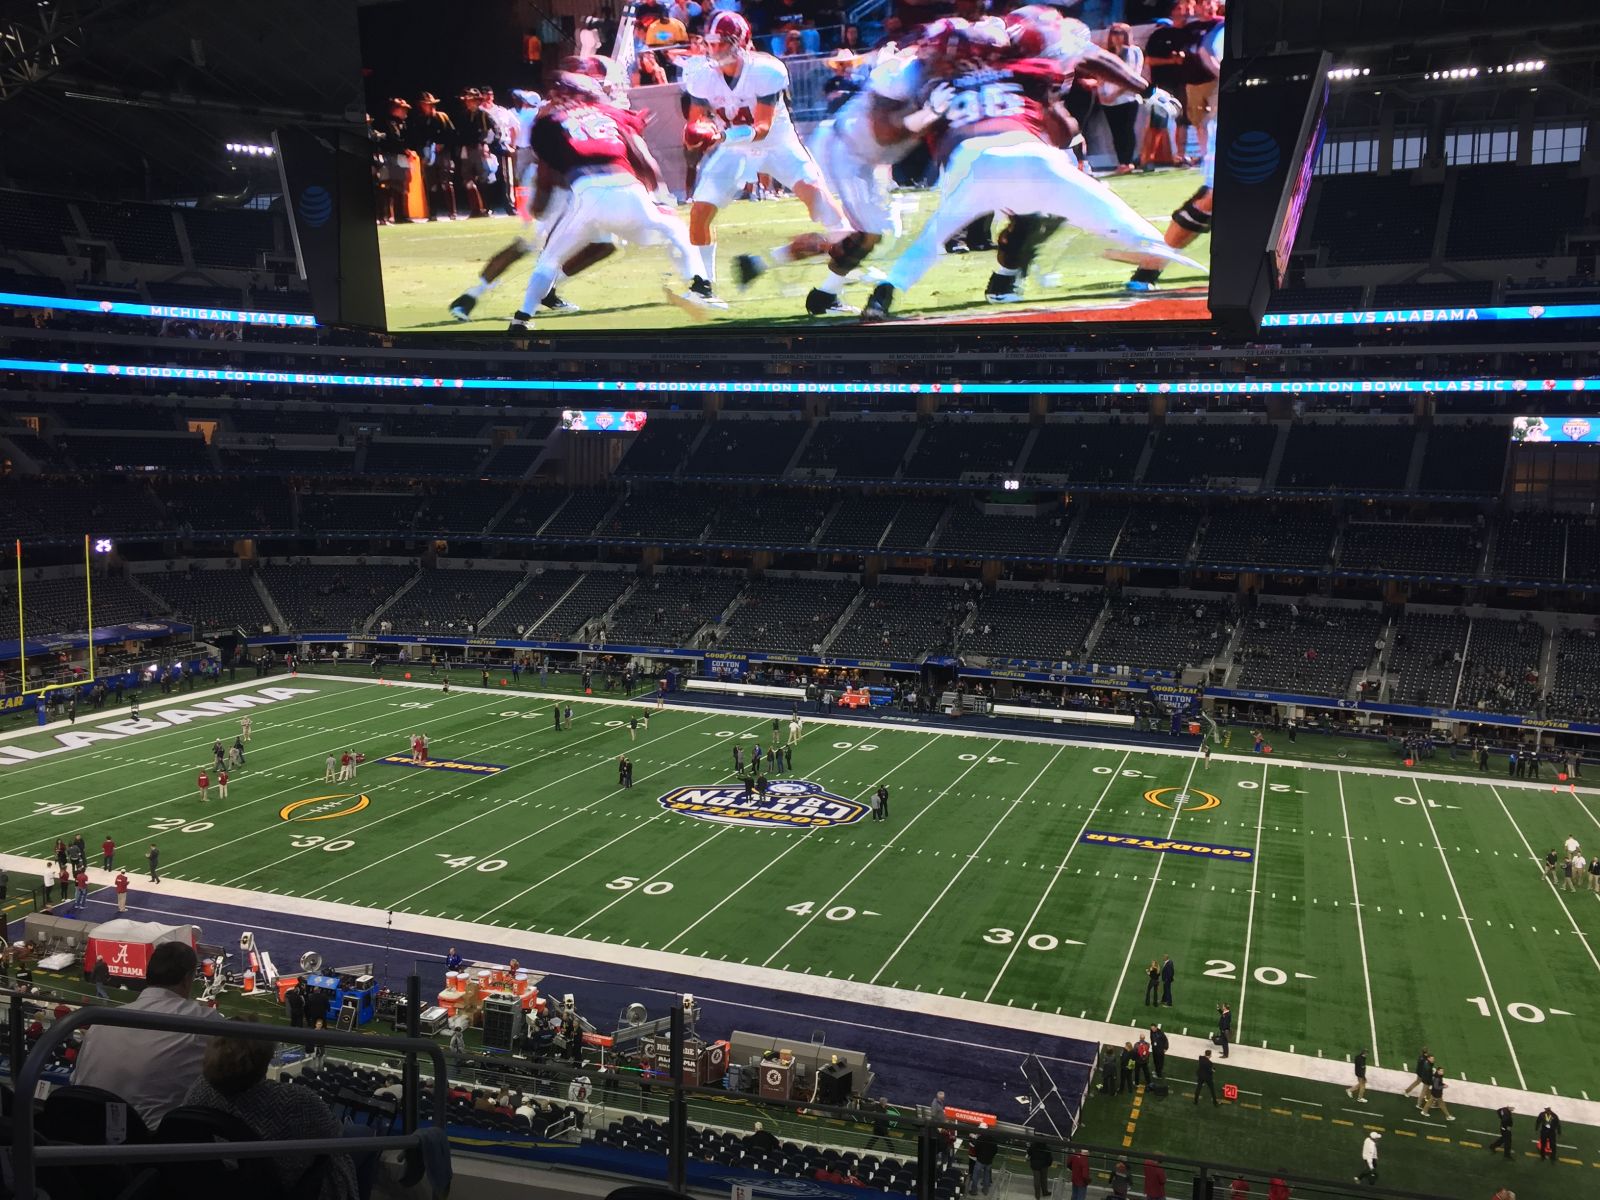 section c308, row 6 seat view  for football - at&t stadium (cowboys stadium)